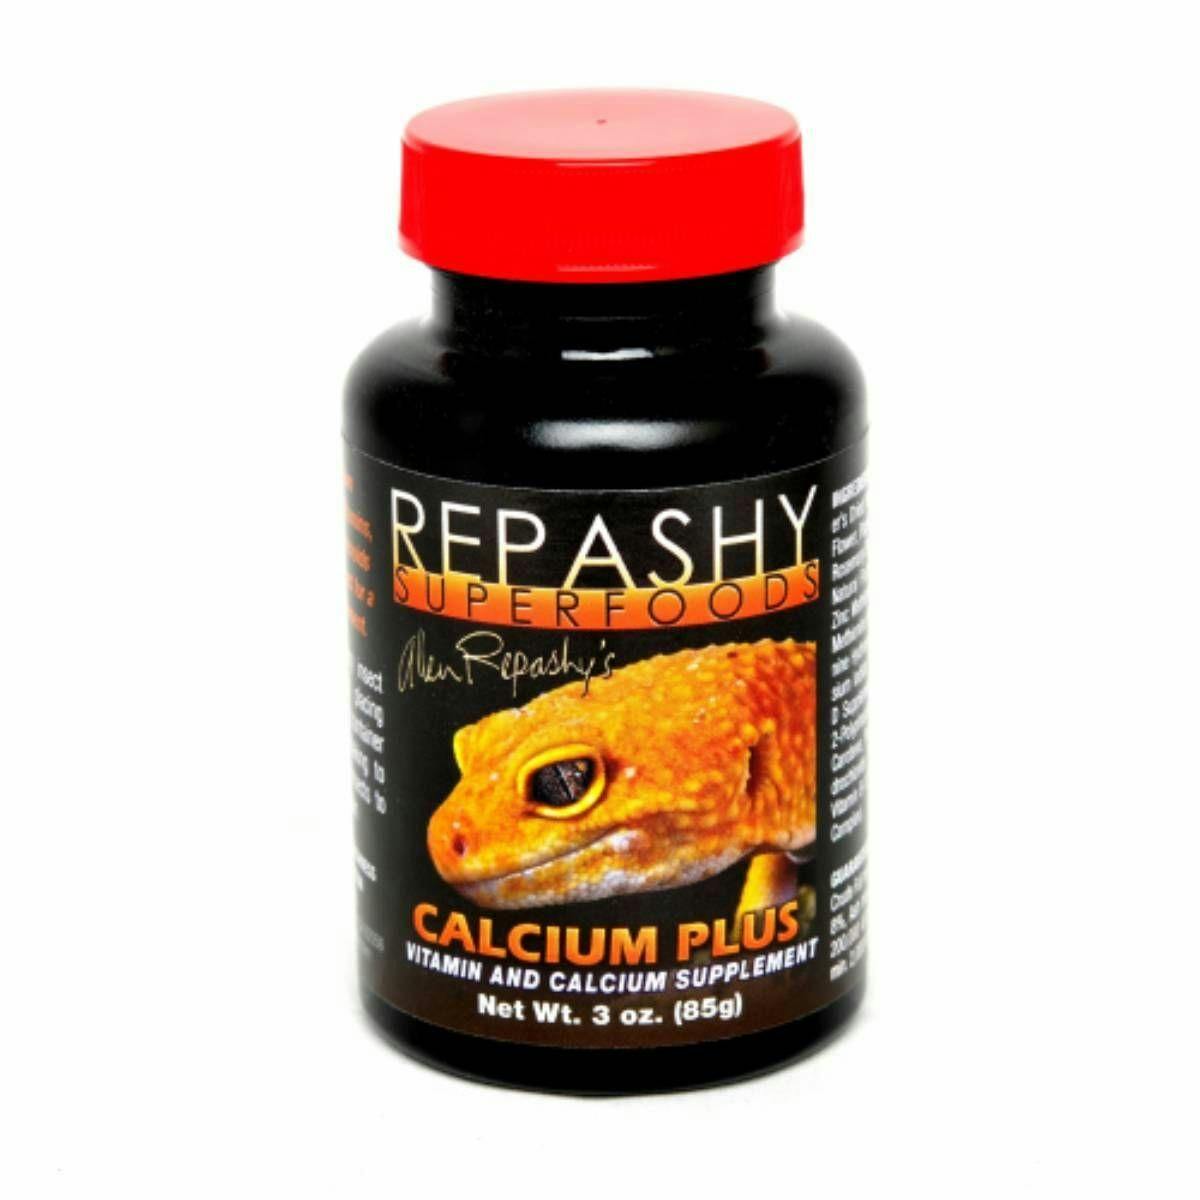 Image for Repashy Calcium Plus (3 oz) by Josh's Frogs